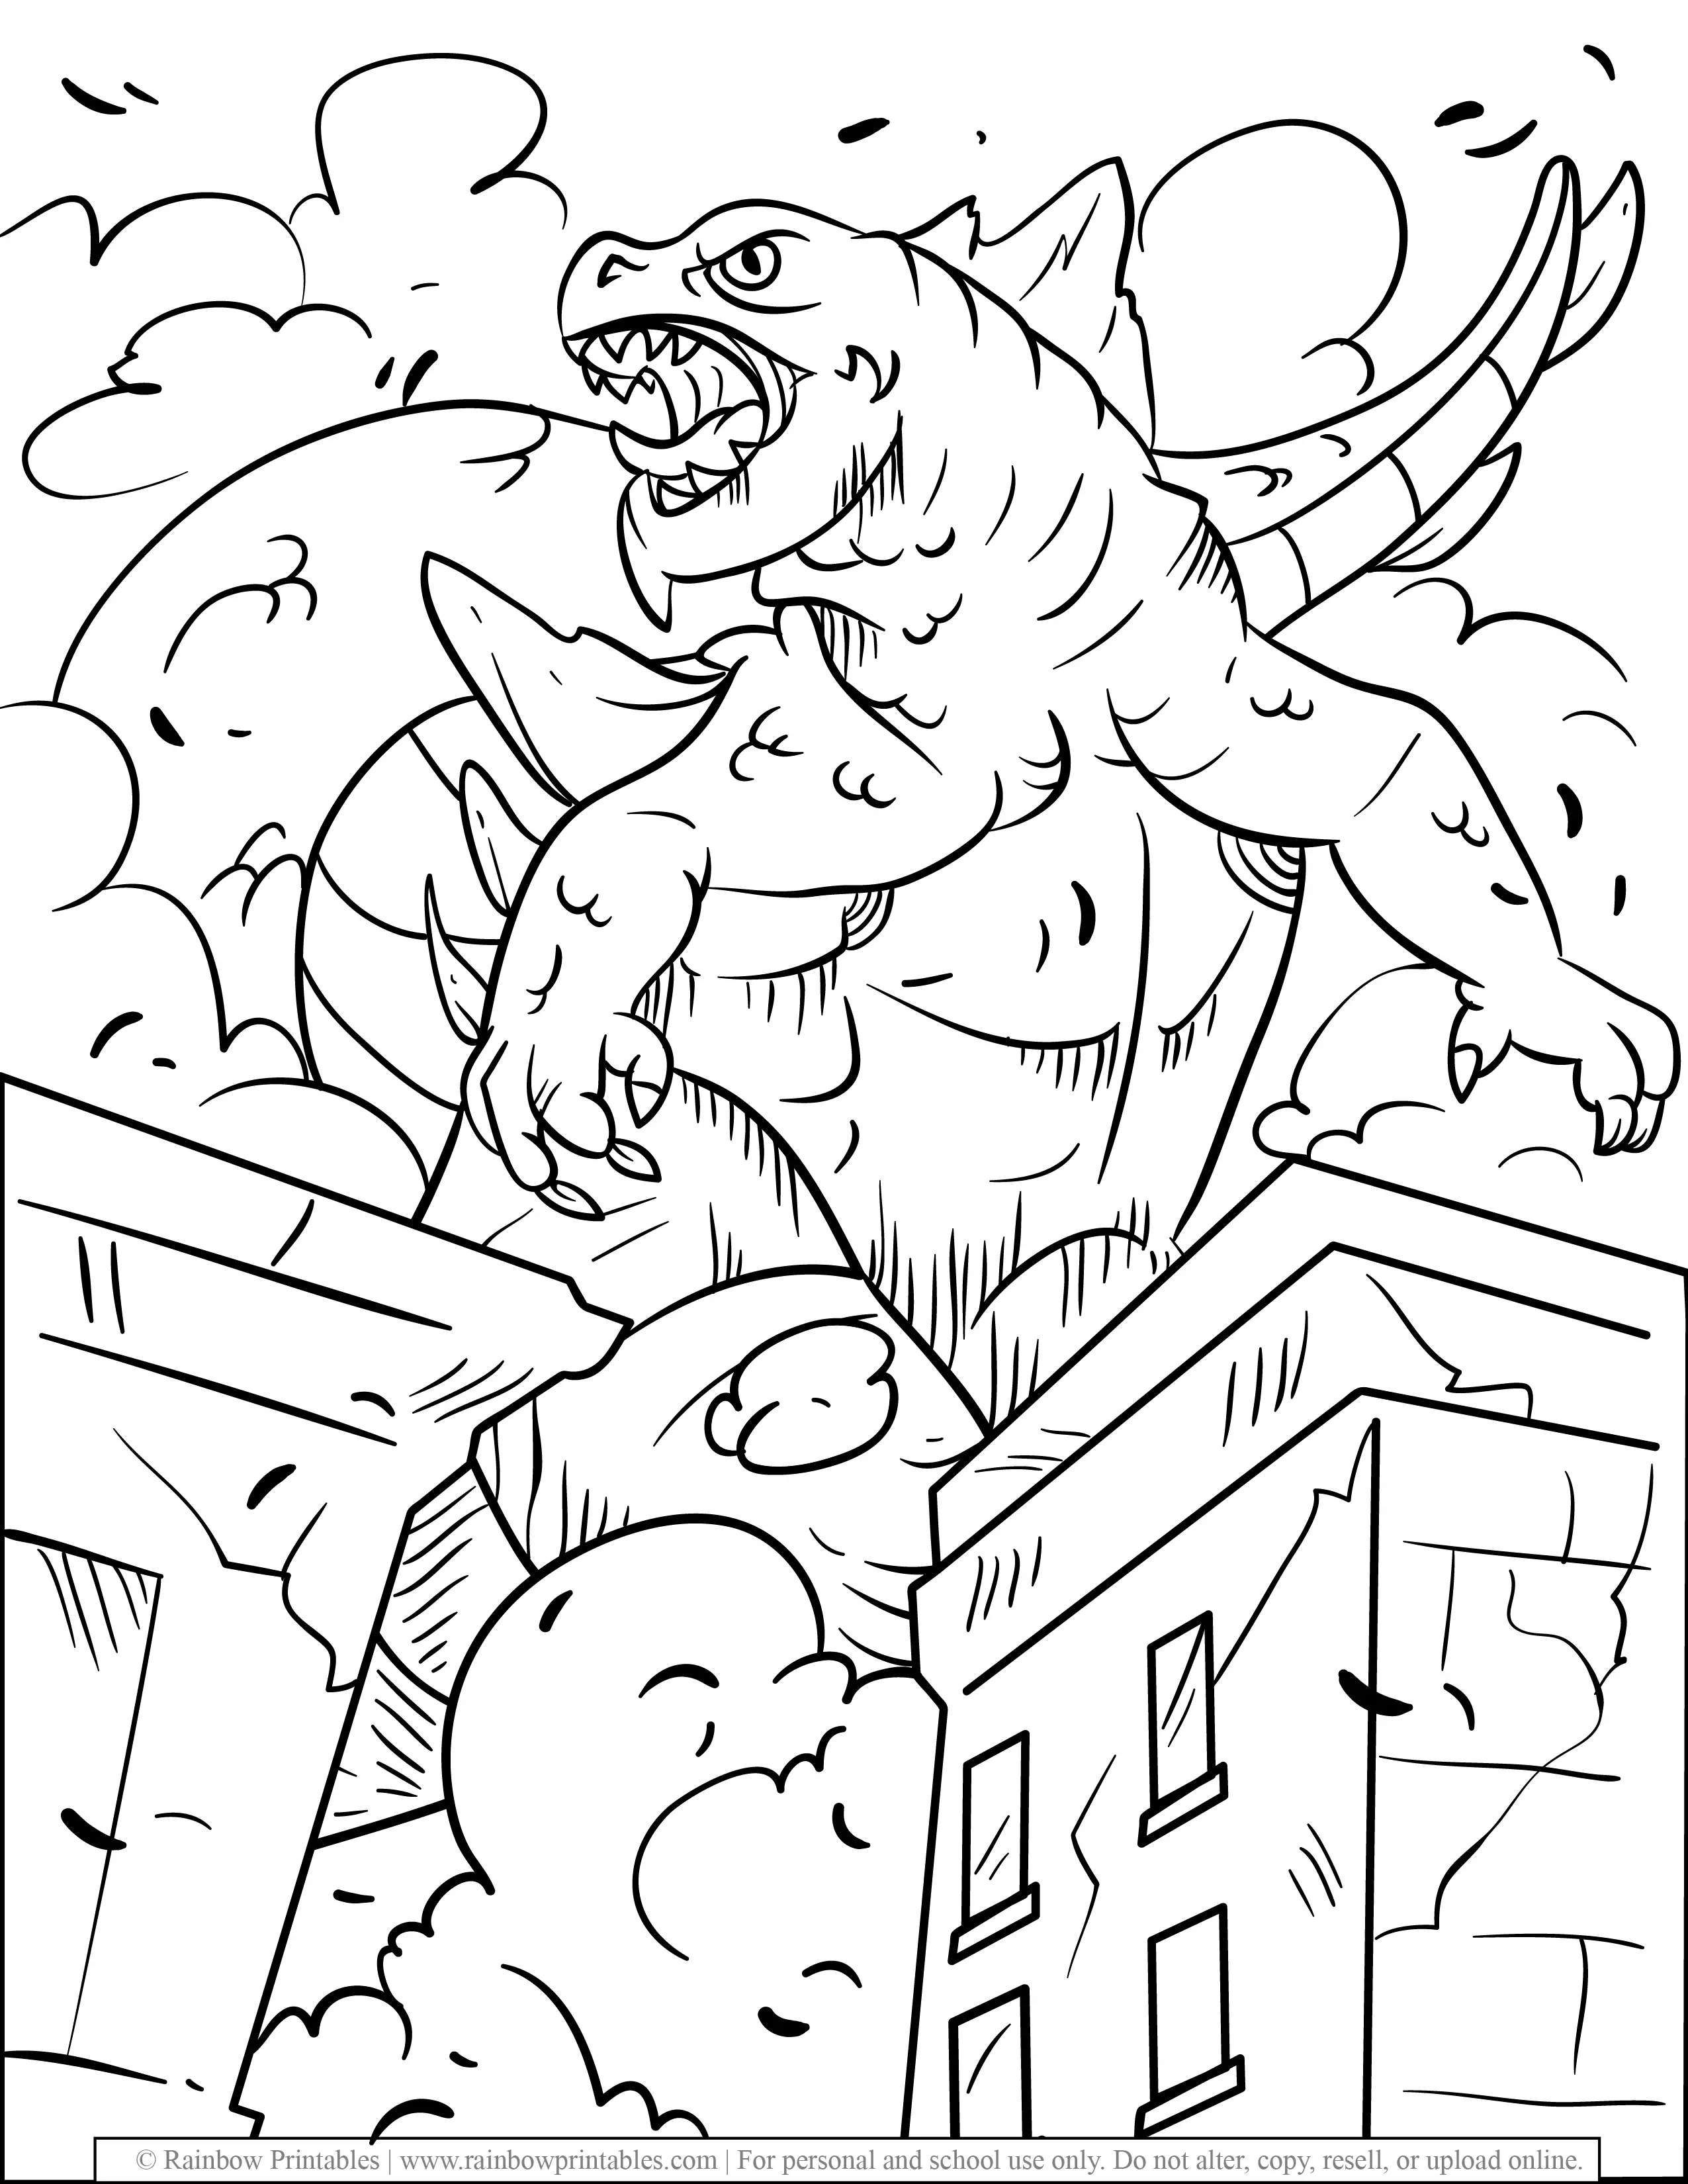 Godzilla Japanese Monster Film Movie COloring Pages for Kids Cartoon Mecca Destroying City King of Monsters